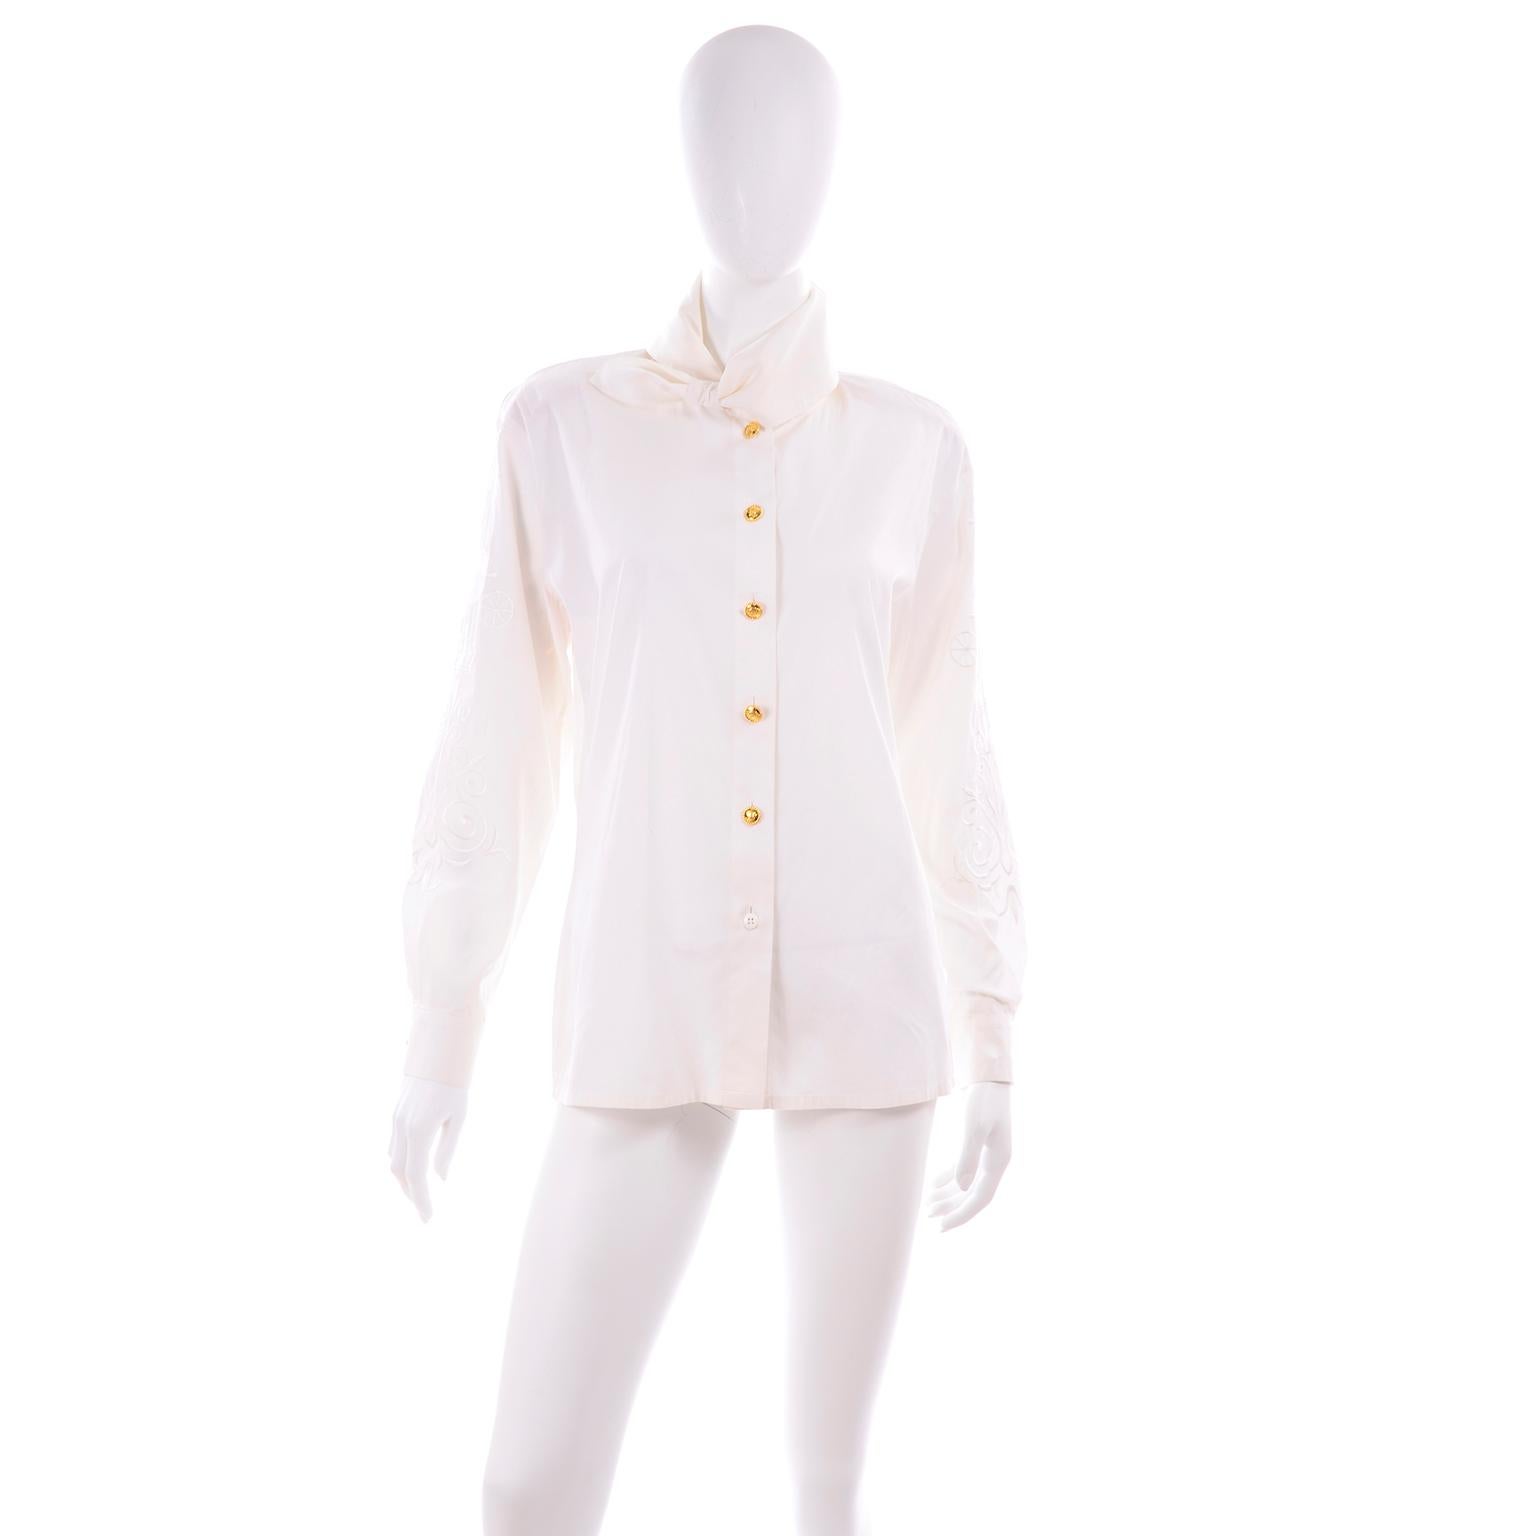 This is another great Escada vintage blouse designed by Margaretha Ley. This white cotton blouse features a scarf tie collar, embroidery on the sleeves that includes a carriage, a crown, and decorative flourishes. The beautiful gold buttons have